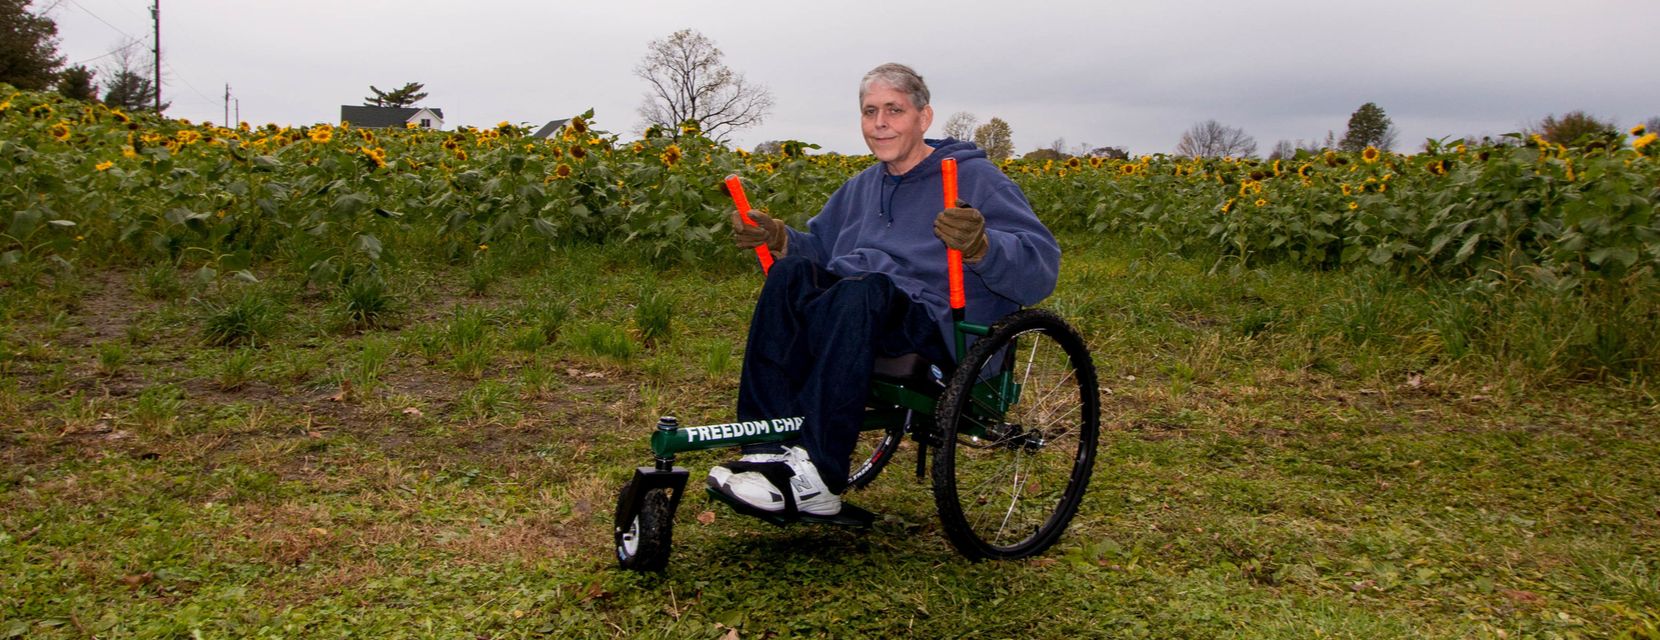 Getting to know my GRIT Freedom Chair: Brad on grass by sunflower field in all-terrain GRIT Freedom Chair wheelchair